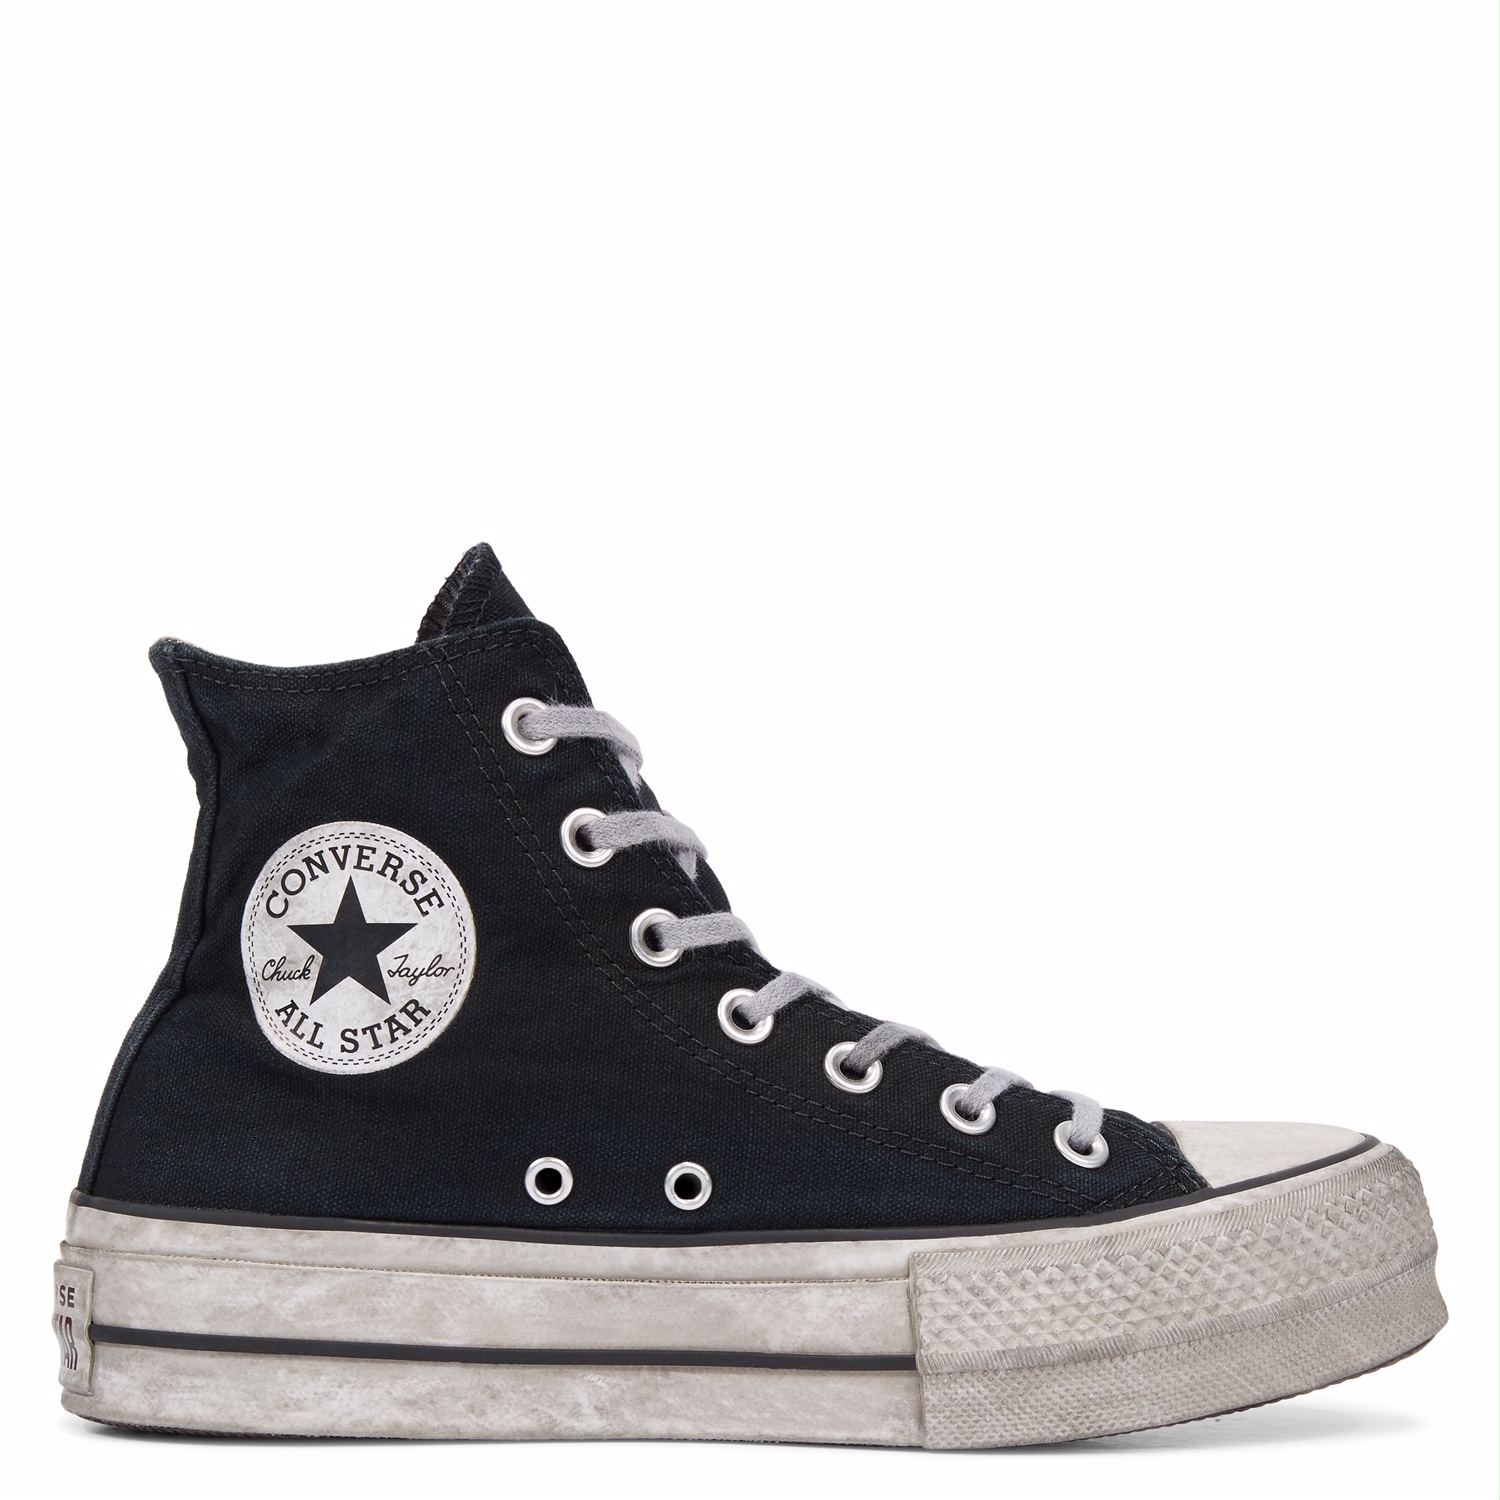 all star limited edition 2019